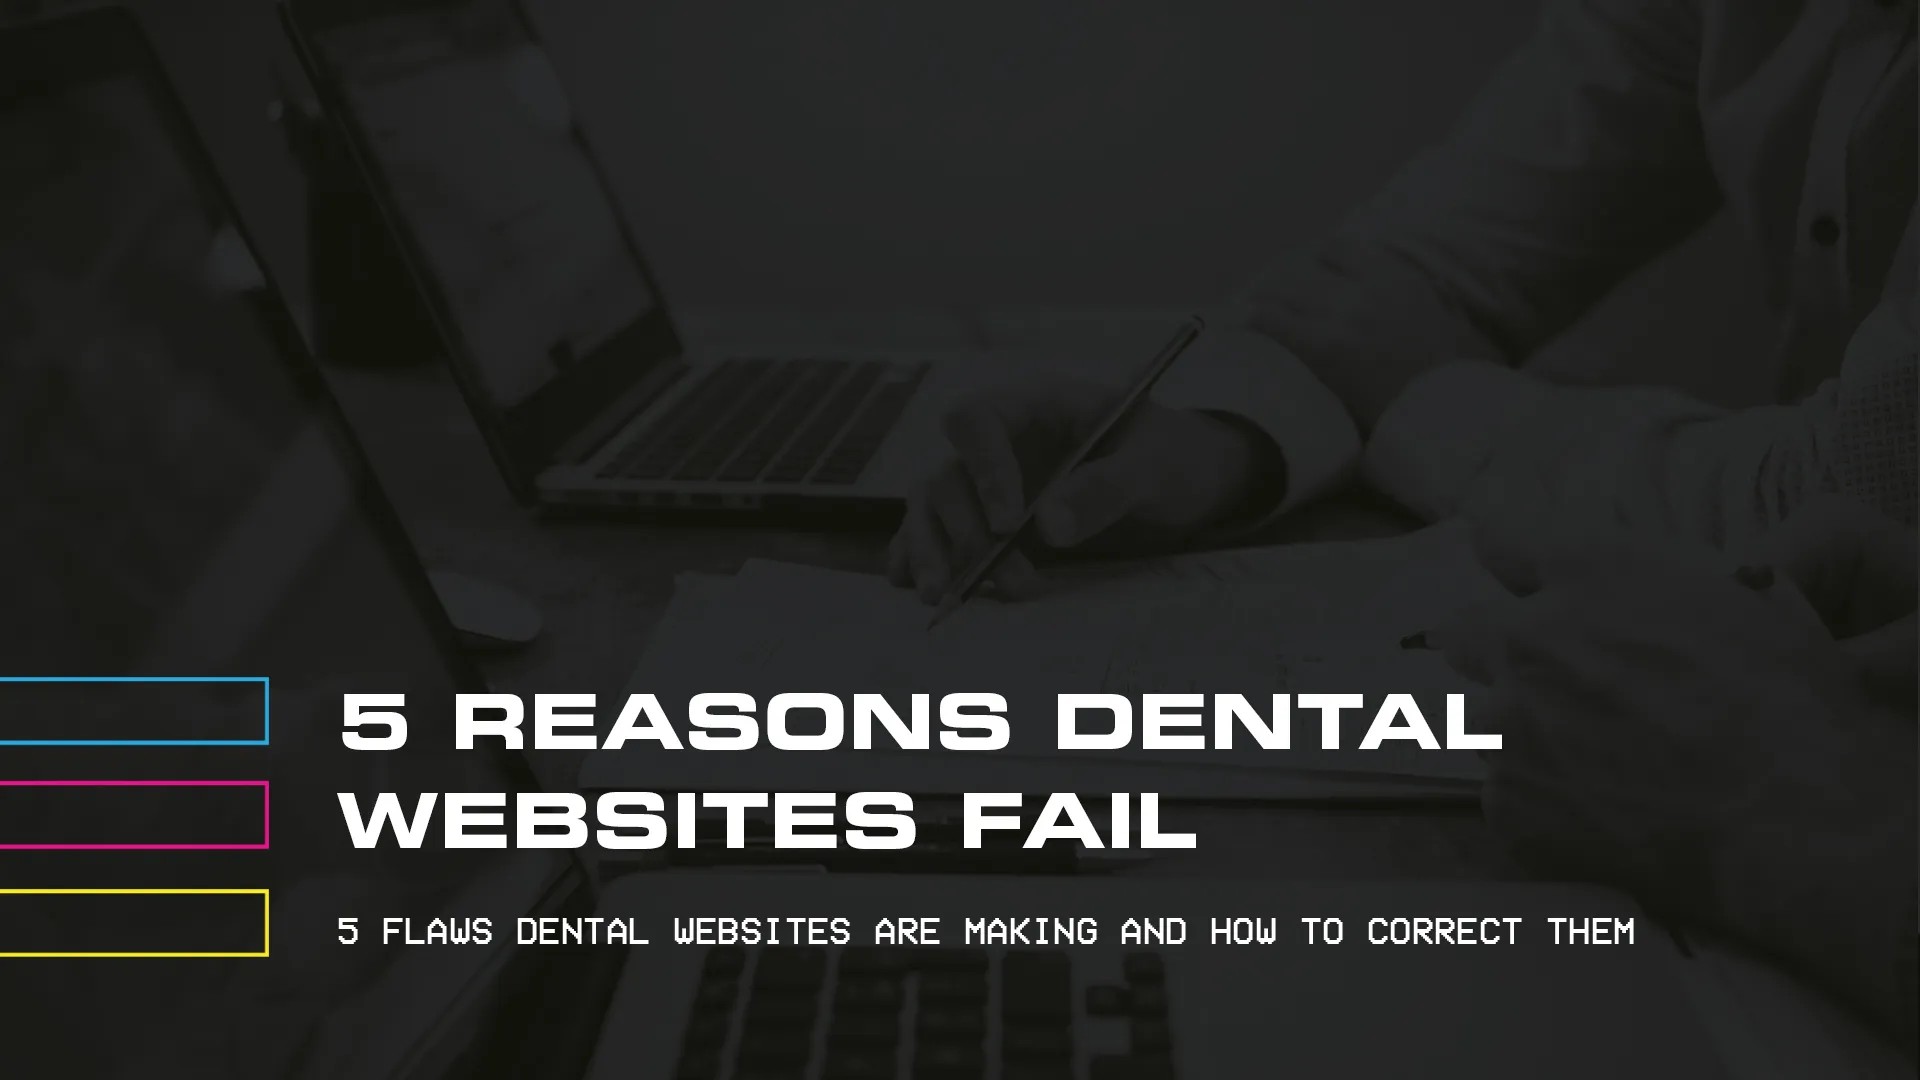 5 Reasons Dental Websites Fail: 5 Flaws Dental Websites are Making and How To Correct Them